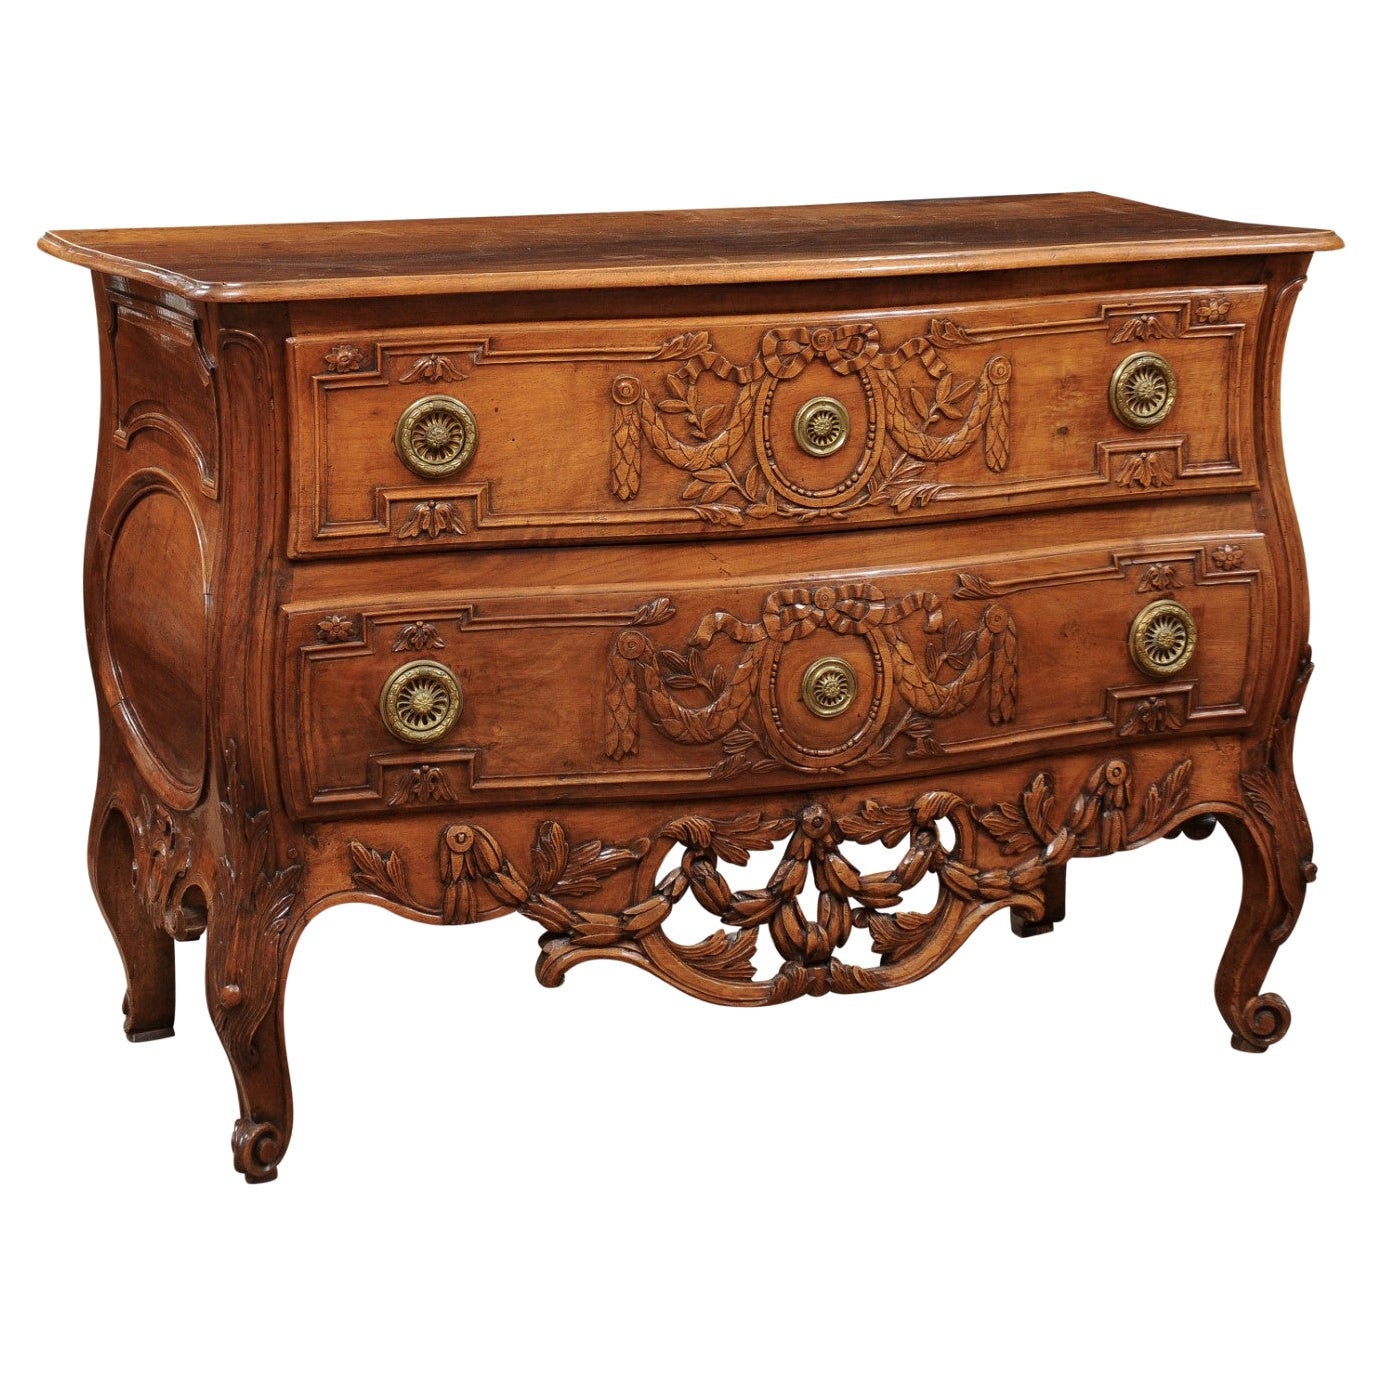 Transitional Louis XV/XVI Walnut Commode with Pierced Apron & Cabriole Legs